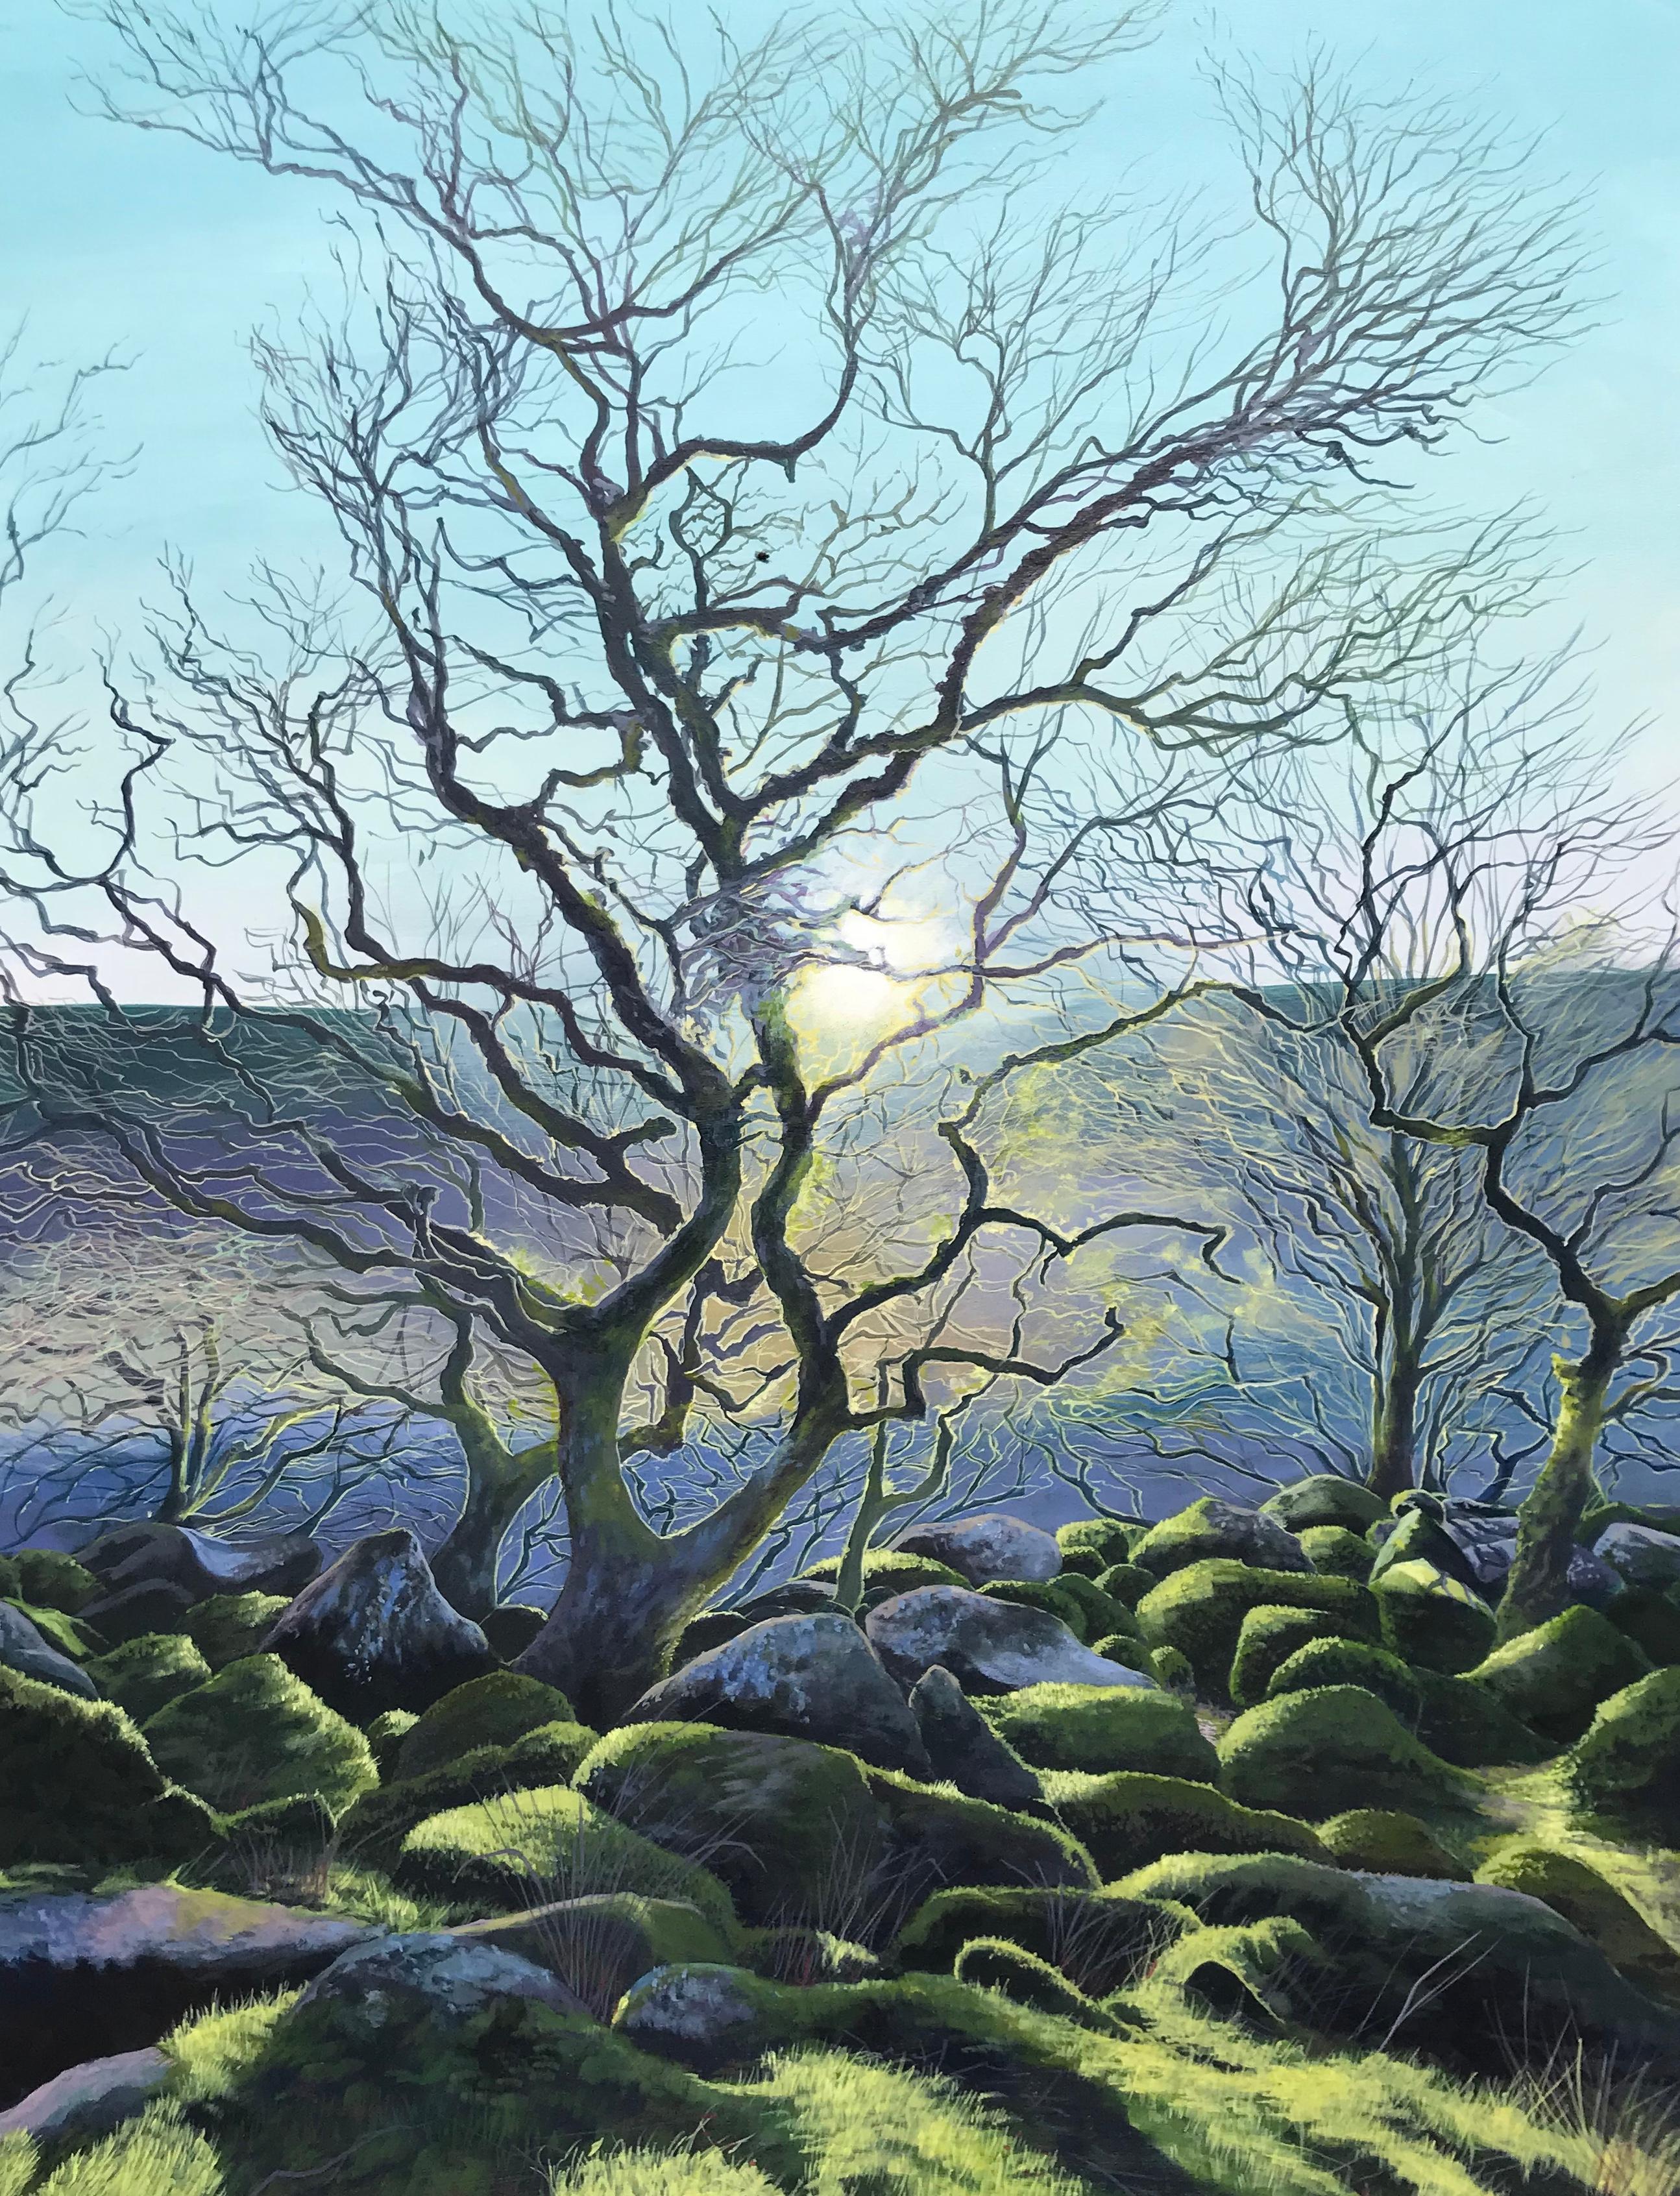 Contemporary view of Wild Dartmoor in England
Framed in a contemporary white wood frame
Image 100x80cms